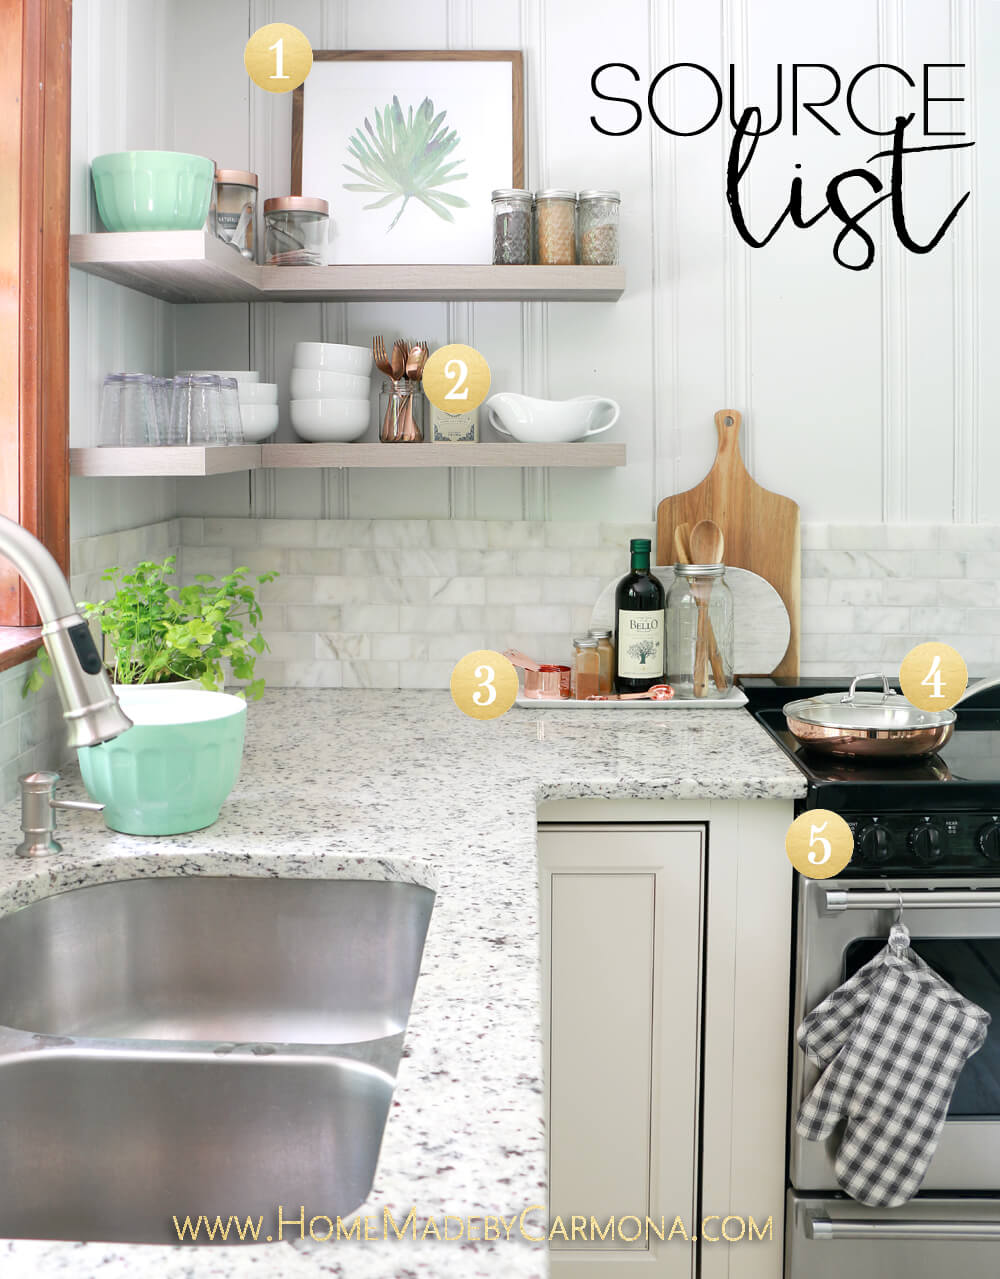 Source List - Kitchen Floating Shelves and Accesssories